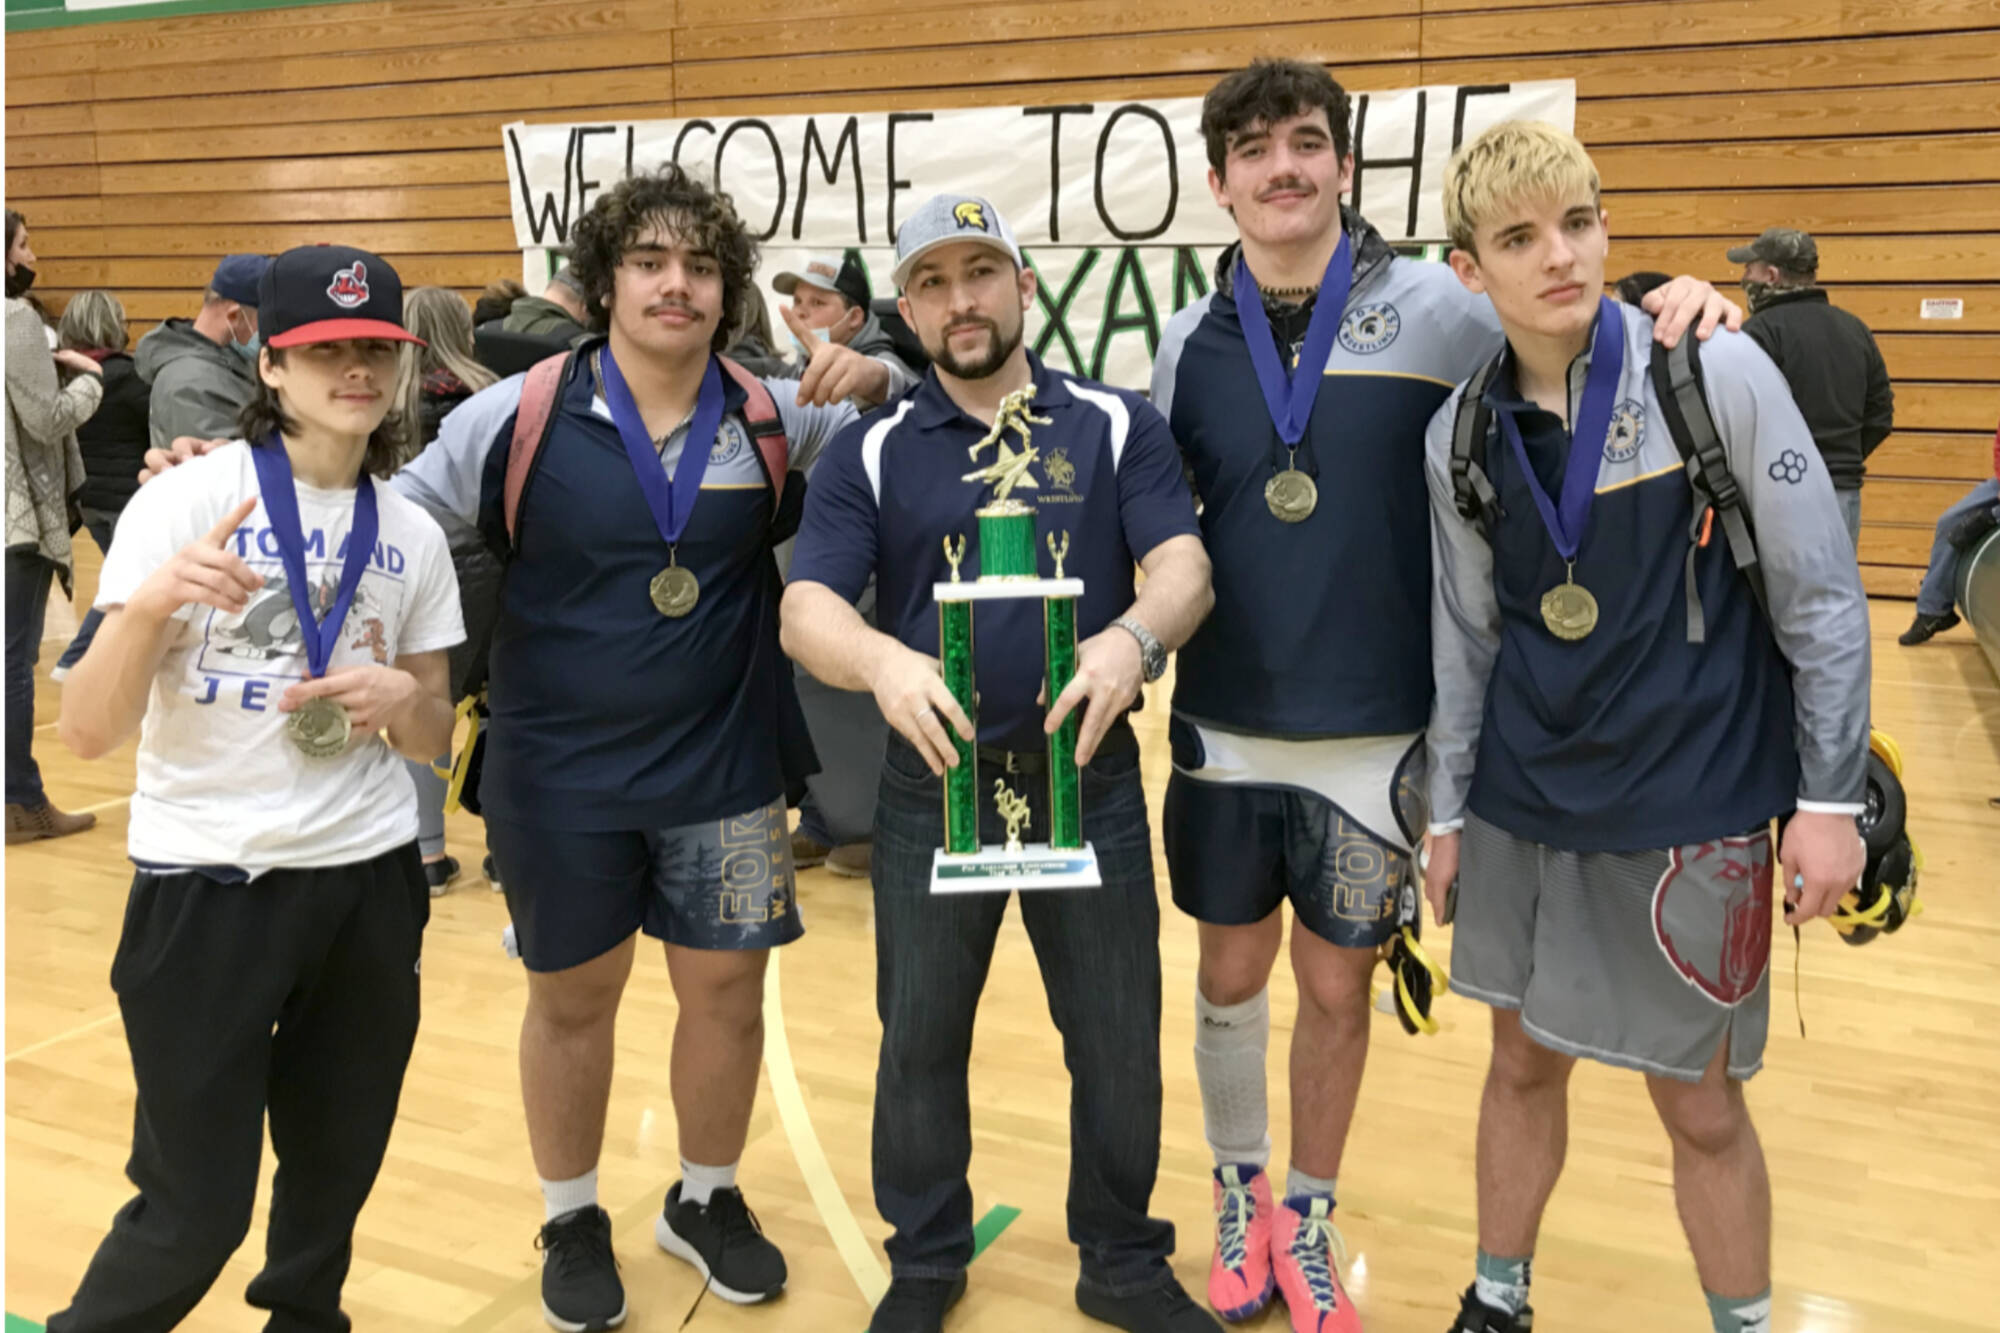 Courtesy of Forks wrestling team
Forks individual champions Saturday at the Pat Alexander Tournament in Tumwater include from left, Matthew Montes (106 pounds), Sloan Tumaua (220 pounds), Asst. Coach Daniel Frishkorn, Hayden Queen (182 pounds) and Jake Weakley (160 pounds).